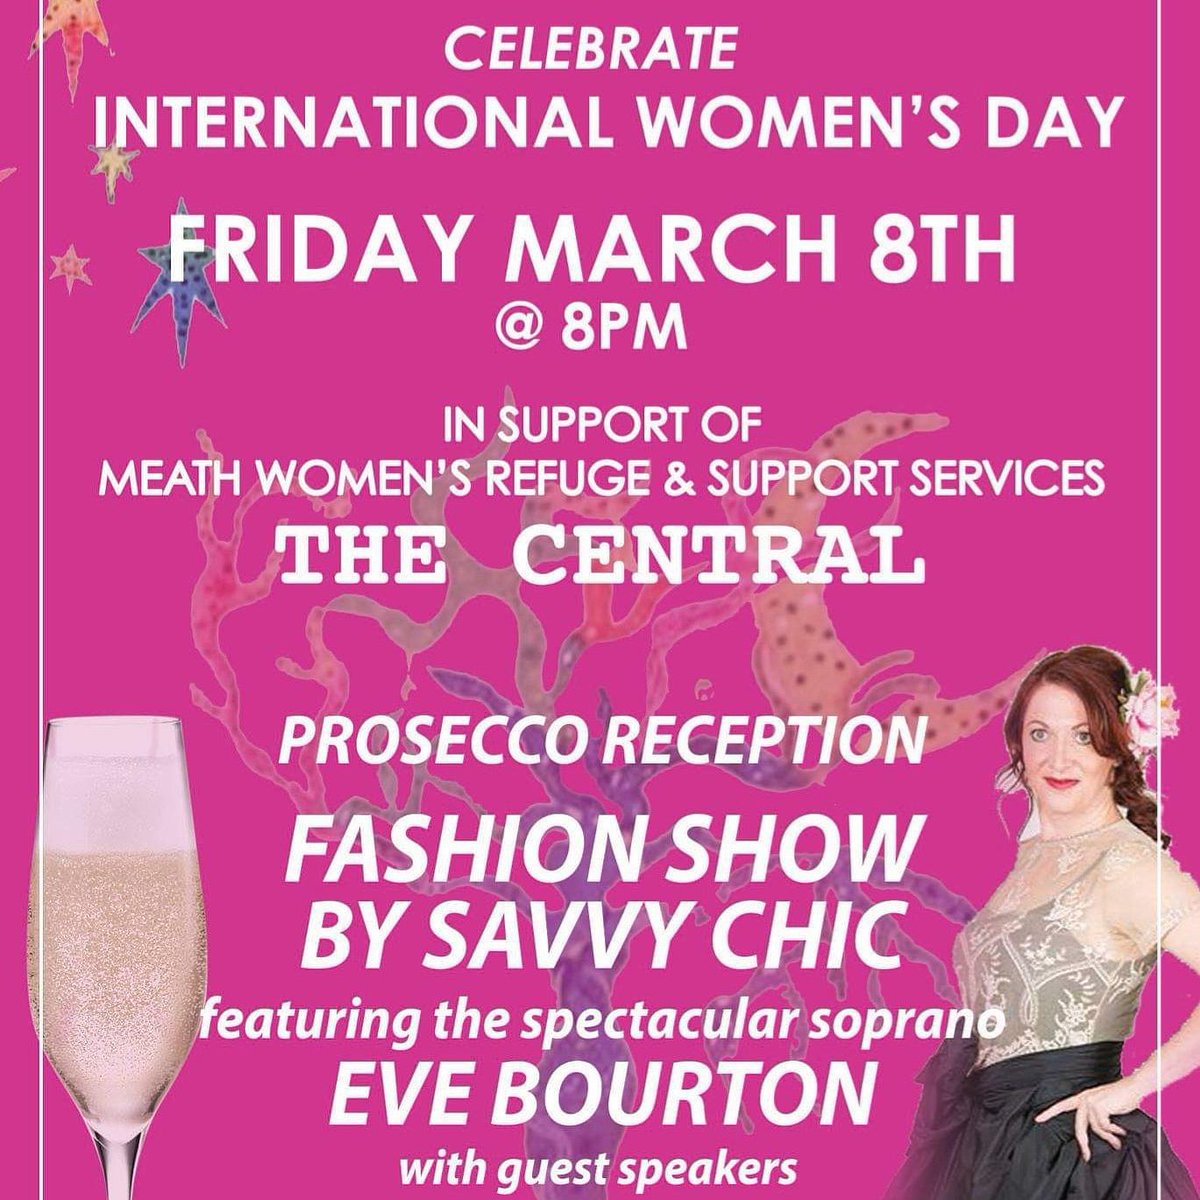 Tickets €15 each. Available from MWRSS on 046 9022393. All proceeds go to Meath Women's Refuge & Support Services
#MWRSS2019 #IWD2019 #COACHINGBYSMK #EVELYNEBOURTON #SIOBHANDALYDESIGNS #CAROLOCONNORMILLINERY #YEMIADENUGA #FITSOCIALMEDIA #SKYDADDYMEDIA #PSYCHOLISTICLIVINGIRELAND